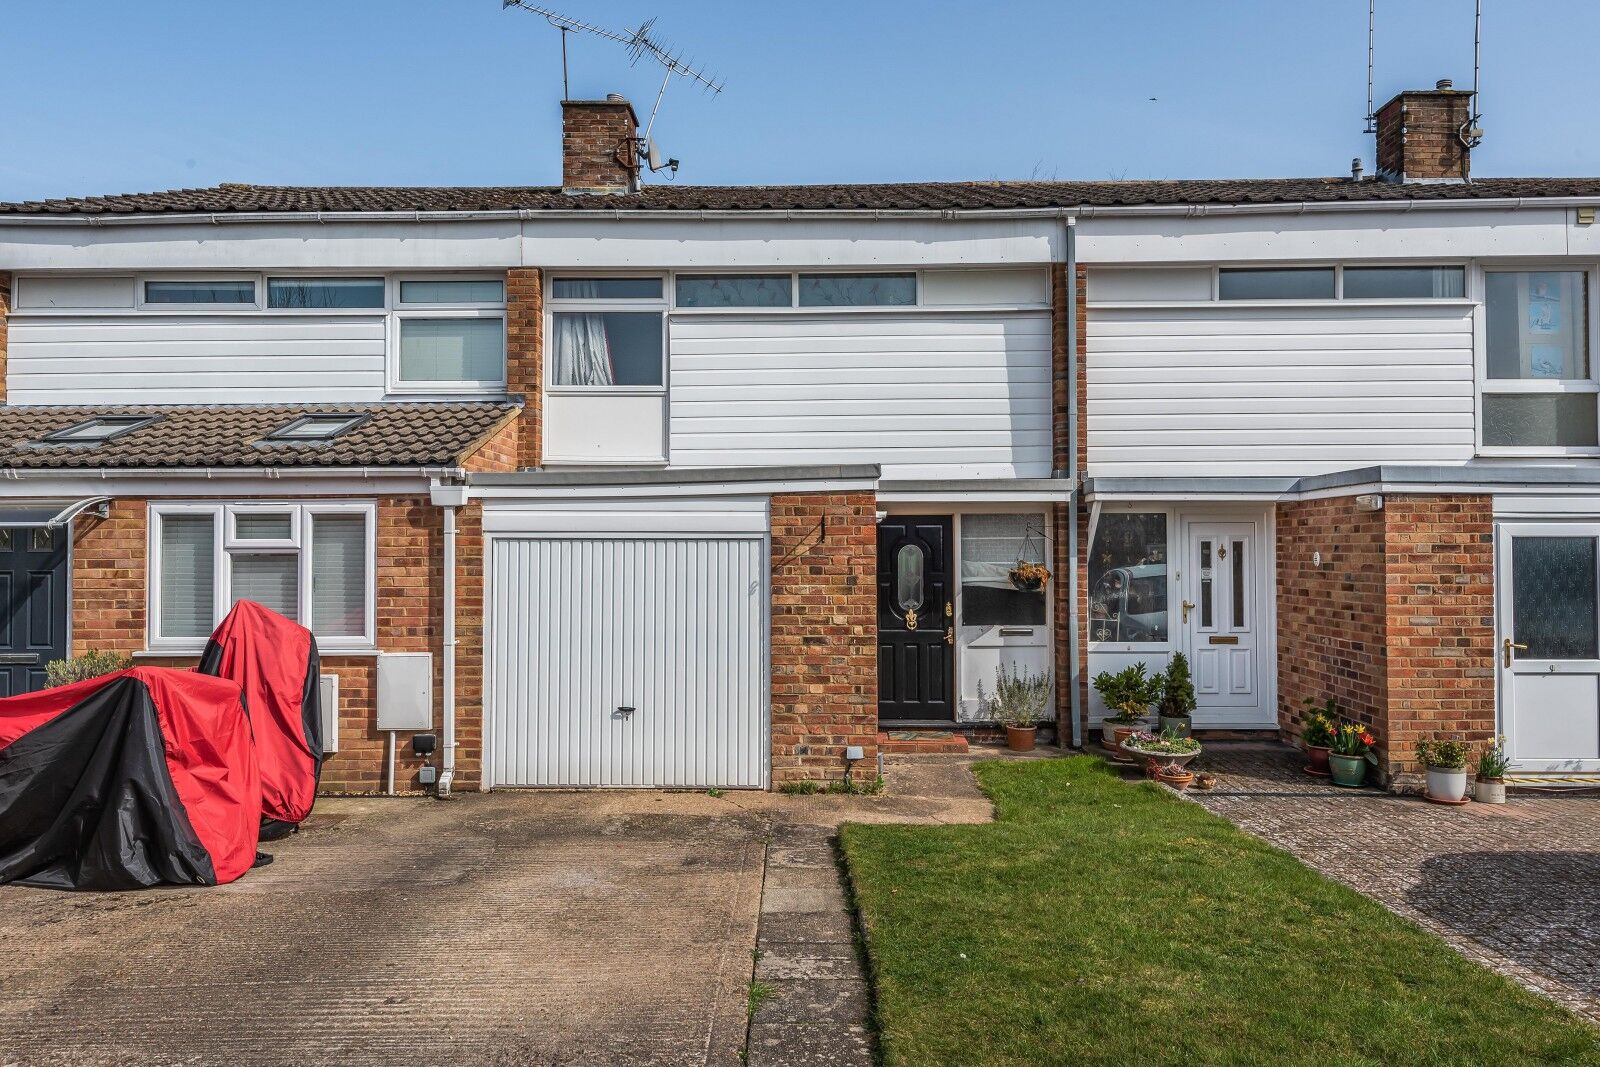 3 bedroom mid terraced house for sale Lea Road, Sonning Common, RG4, main image